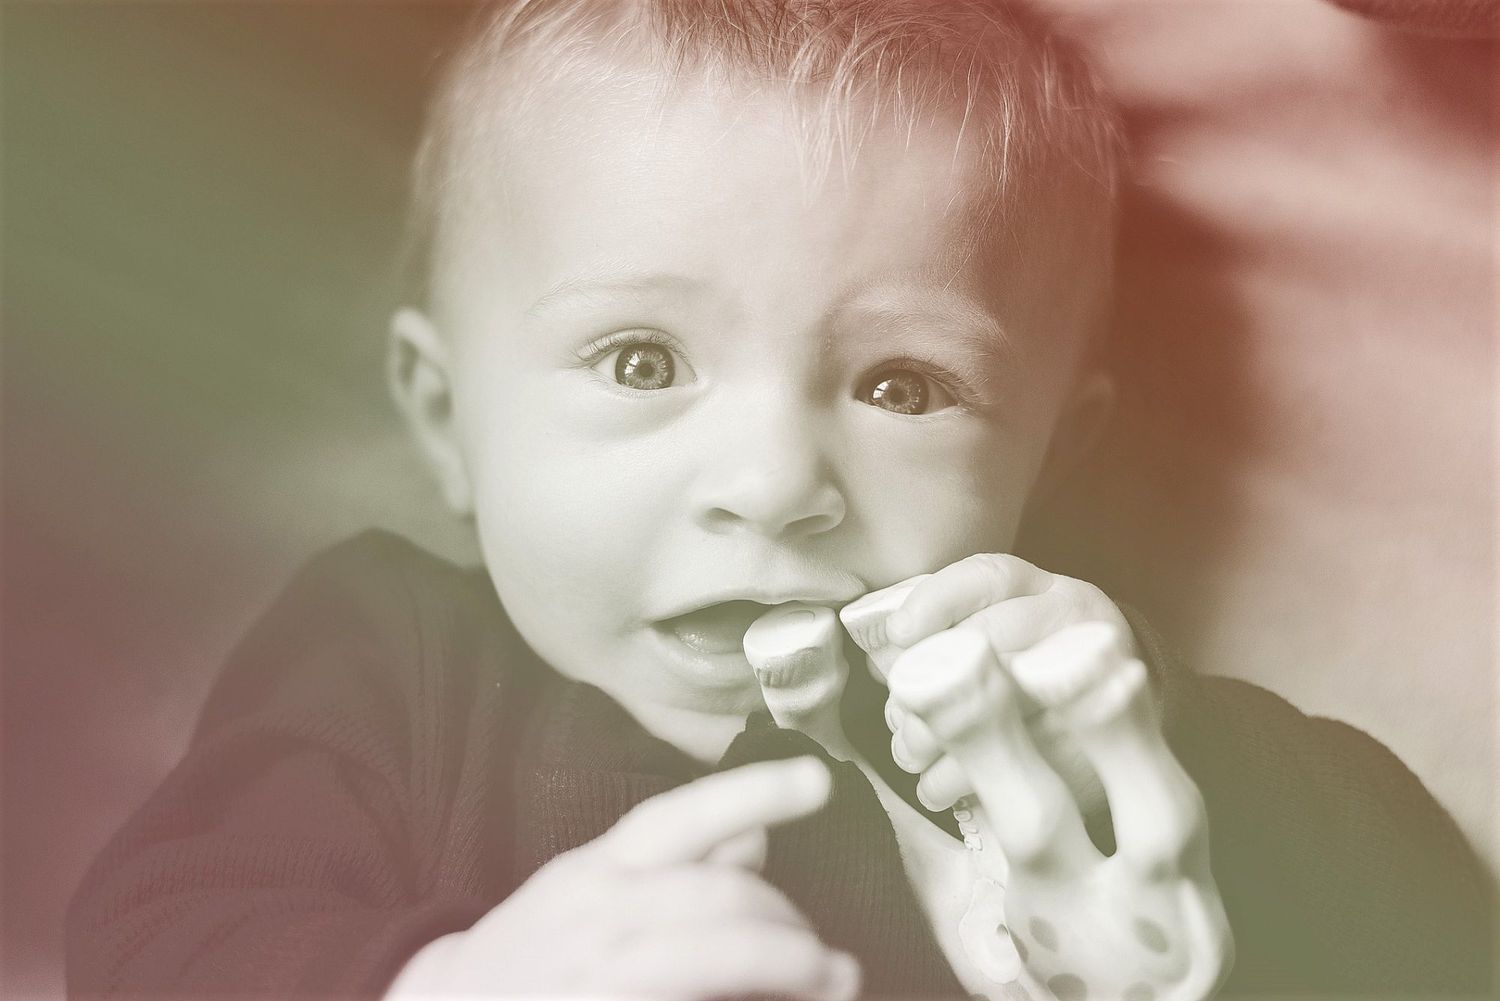 baby chewing on a toy